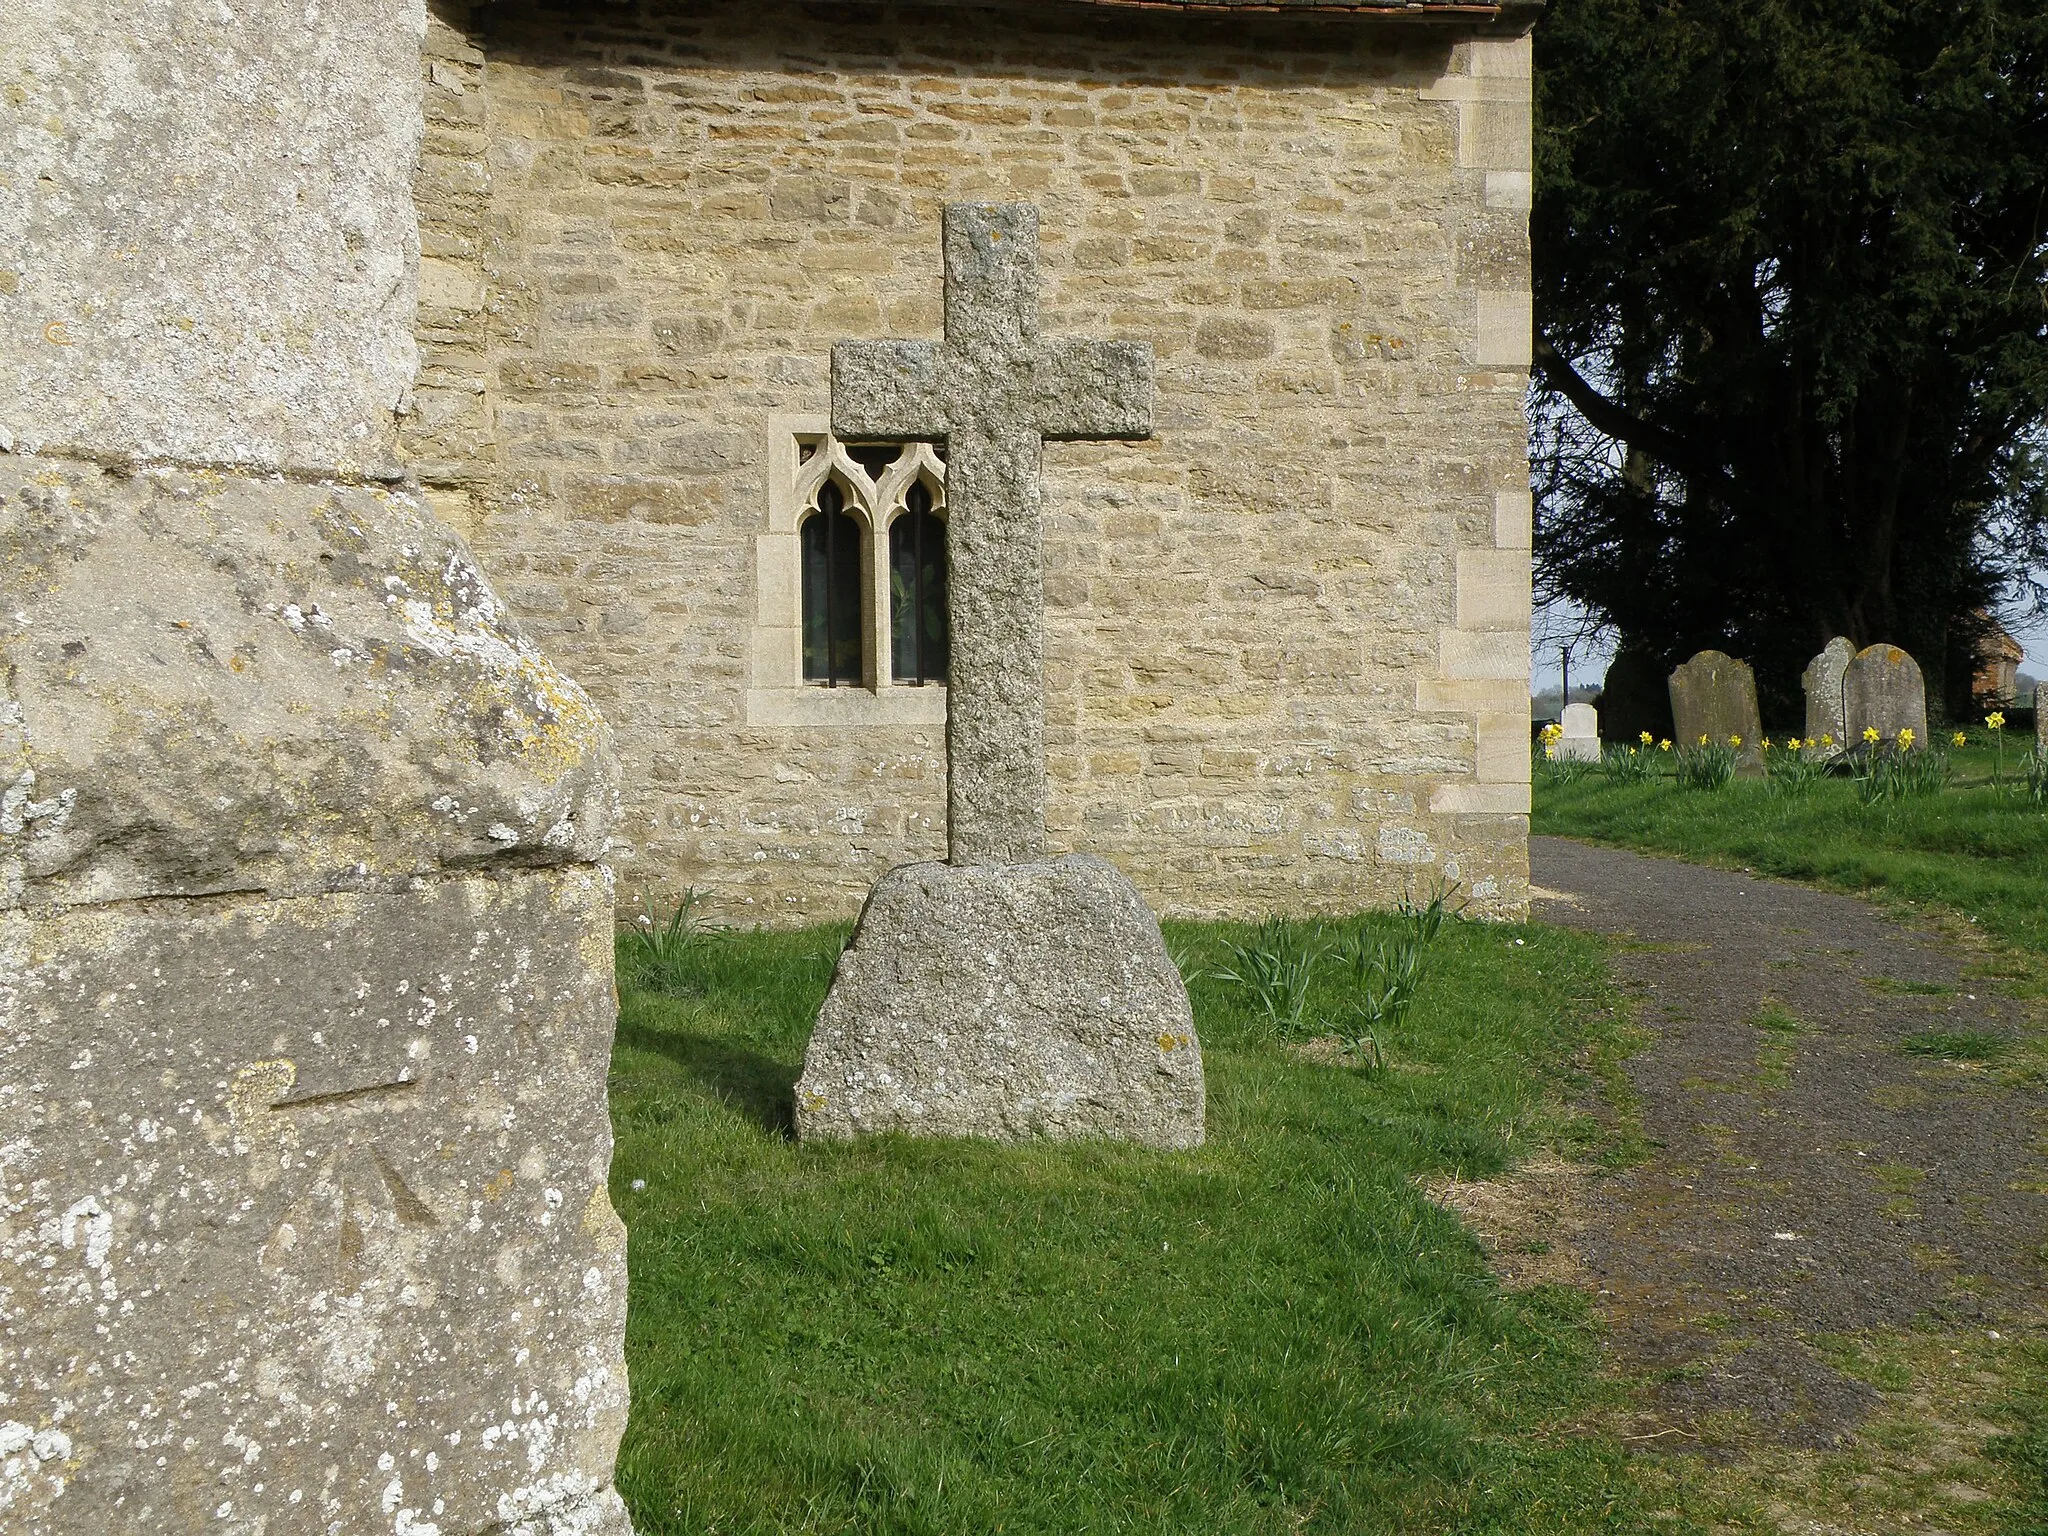 Photo showing: Bench Mark, Keysoe Church An OS bench mark on the angled buttress supporting the tower and spire of Keysoe church.